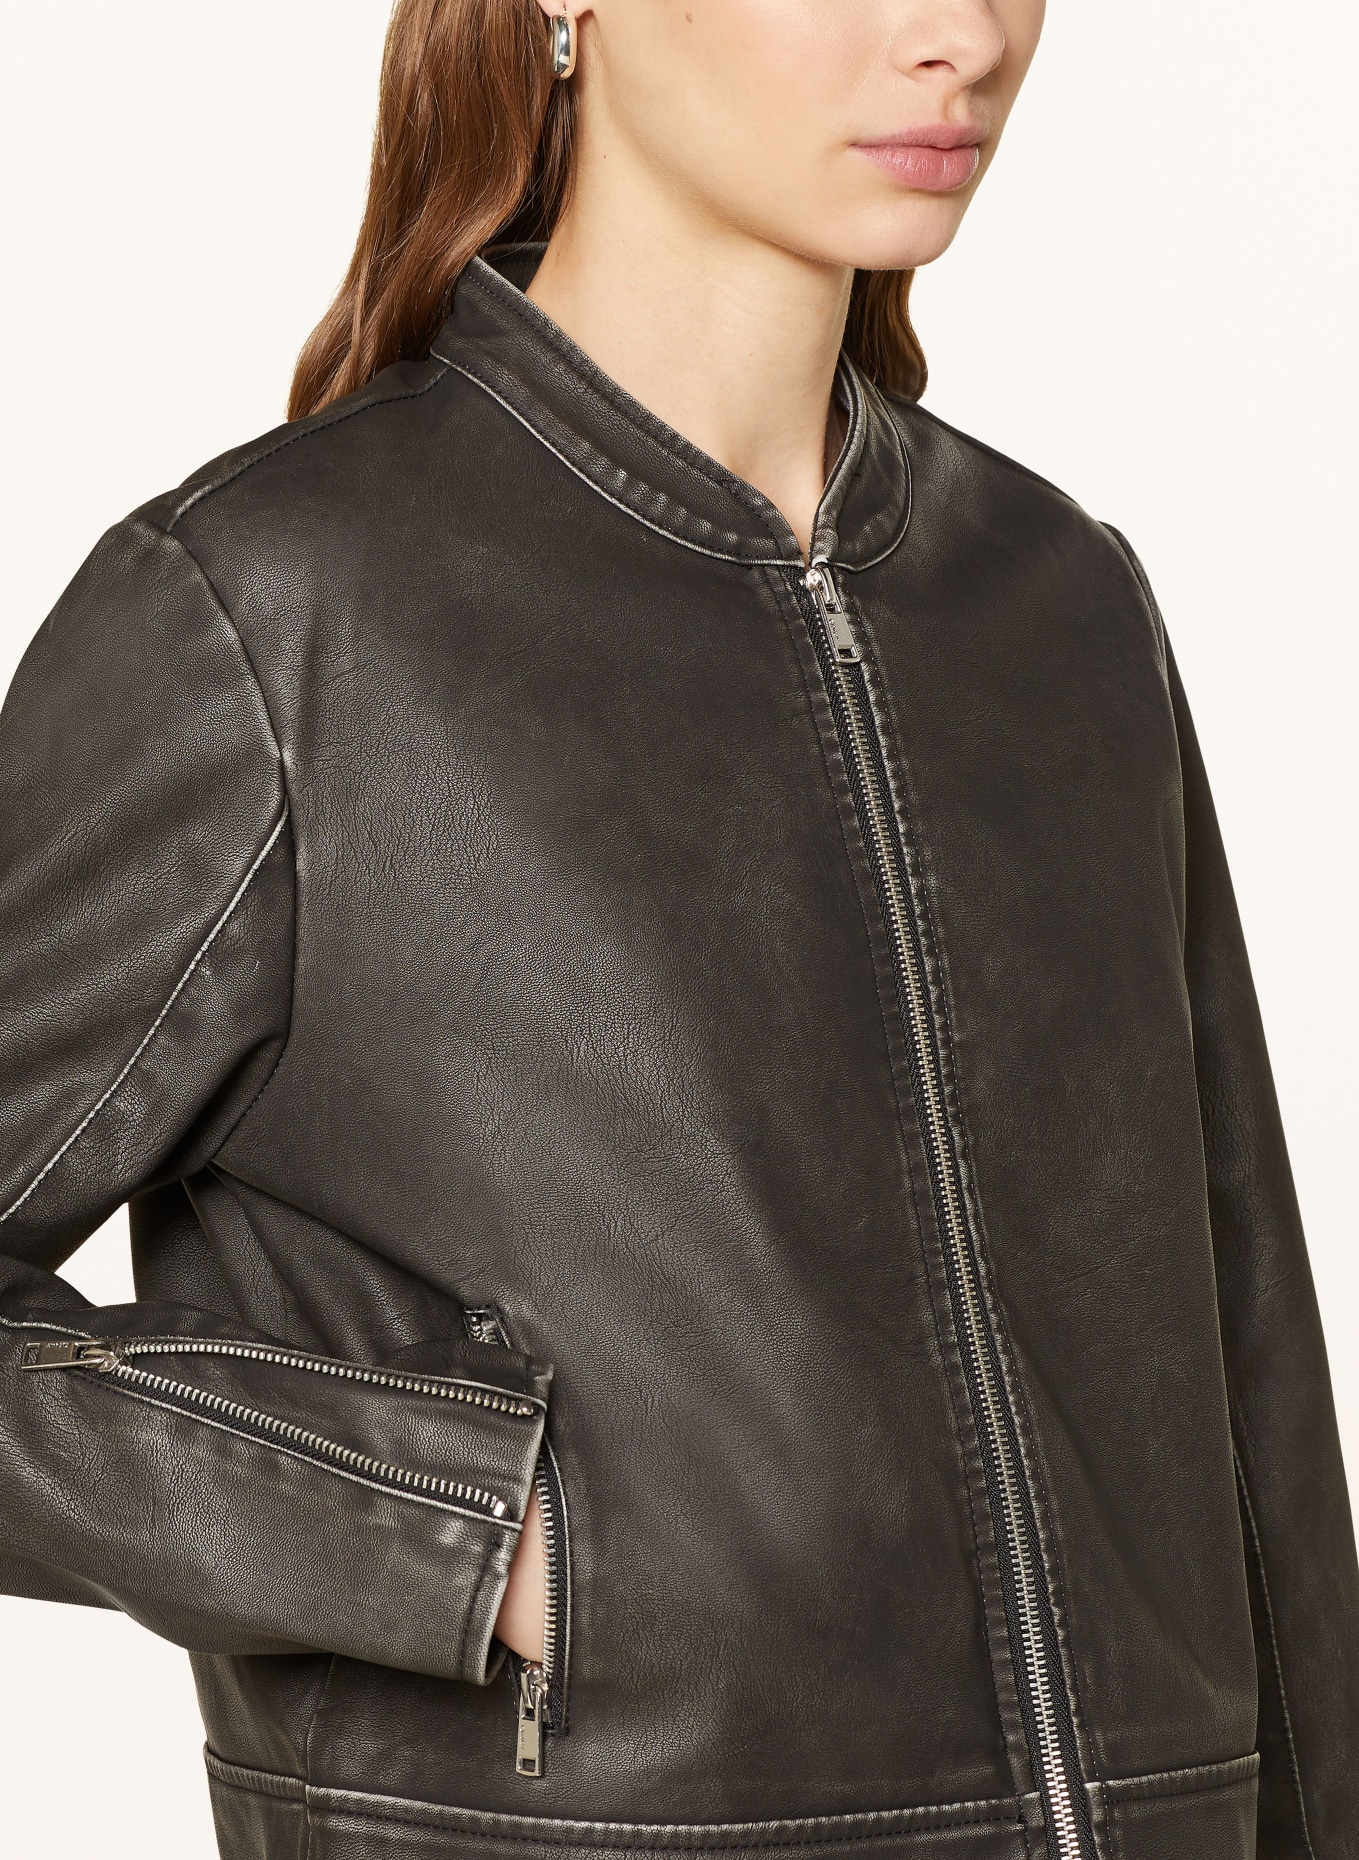 ONLY Jacket in leather look, Color: BLACK (Image 4)